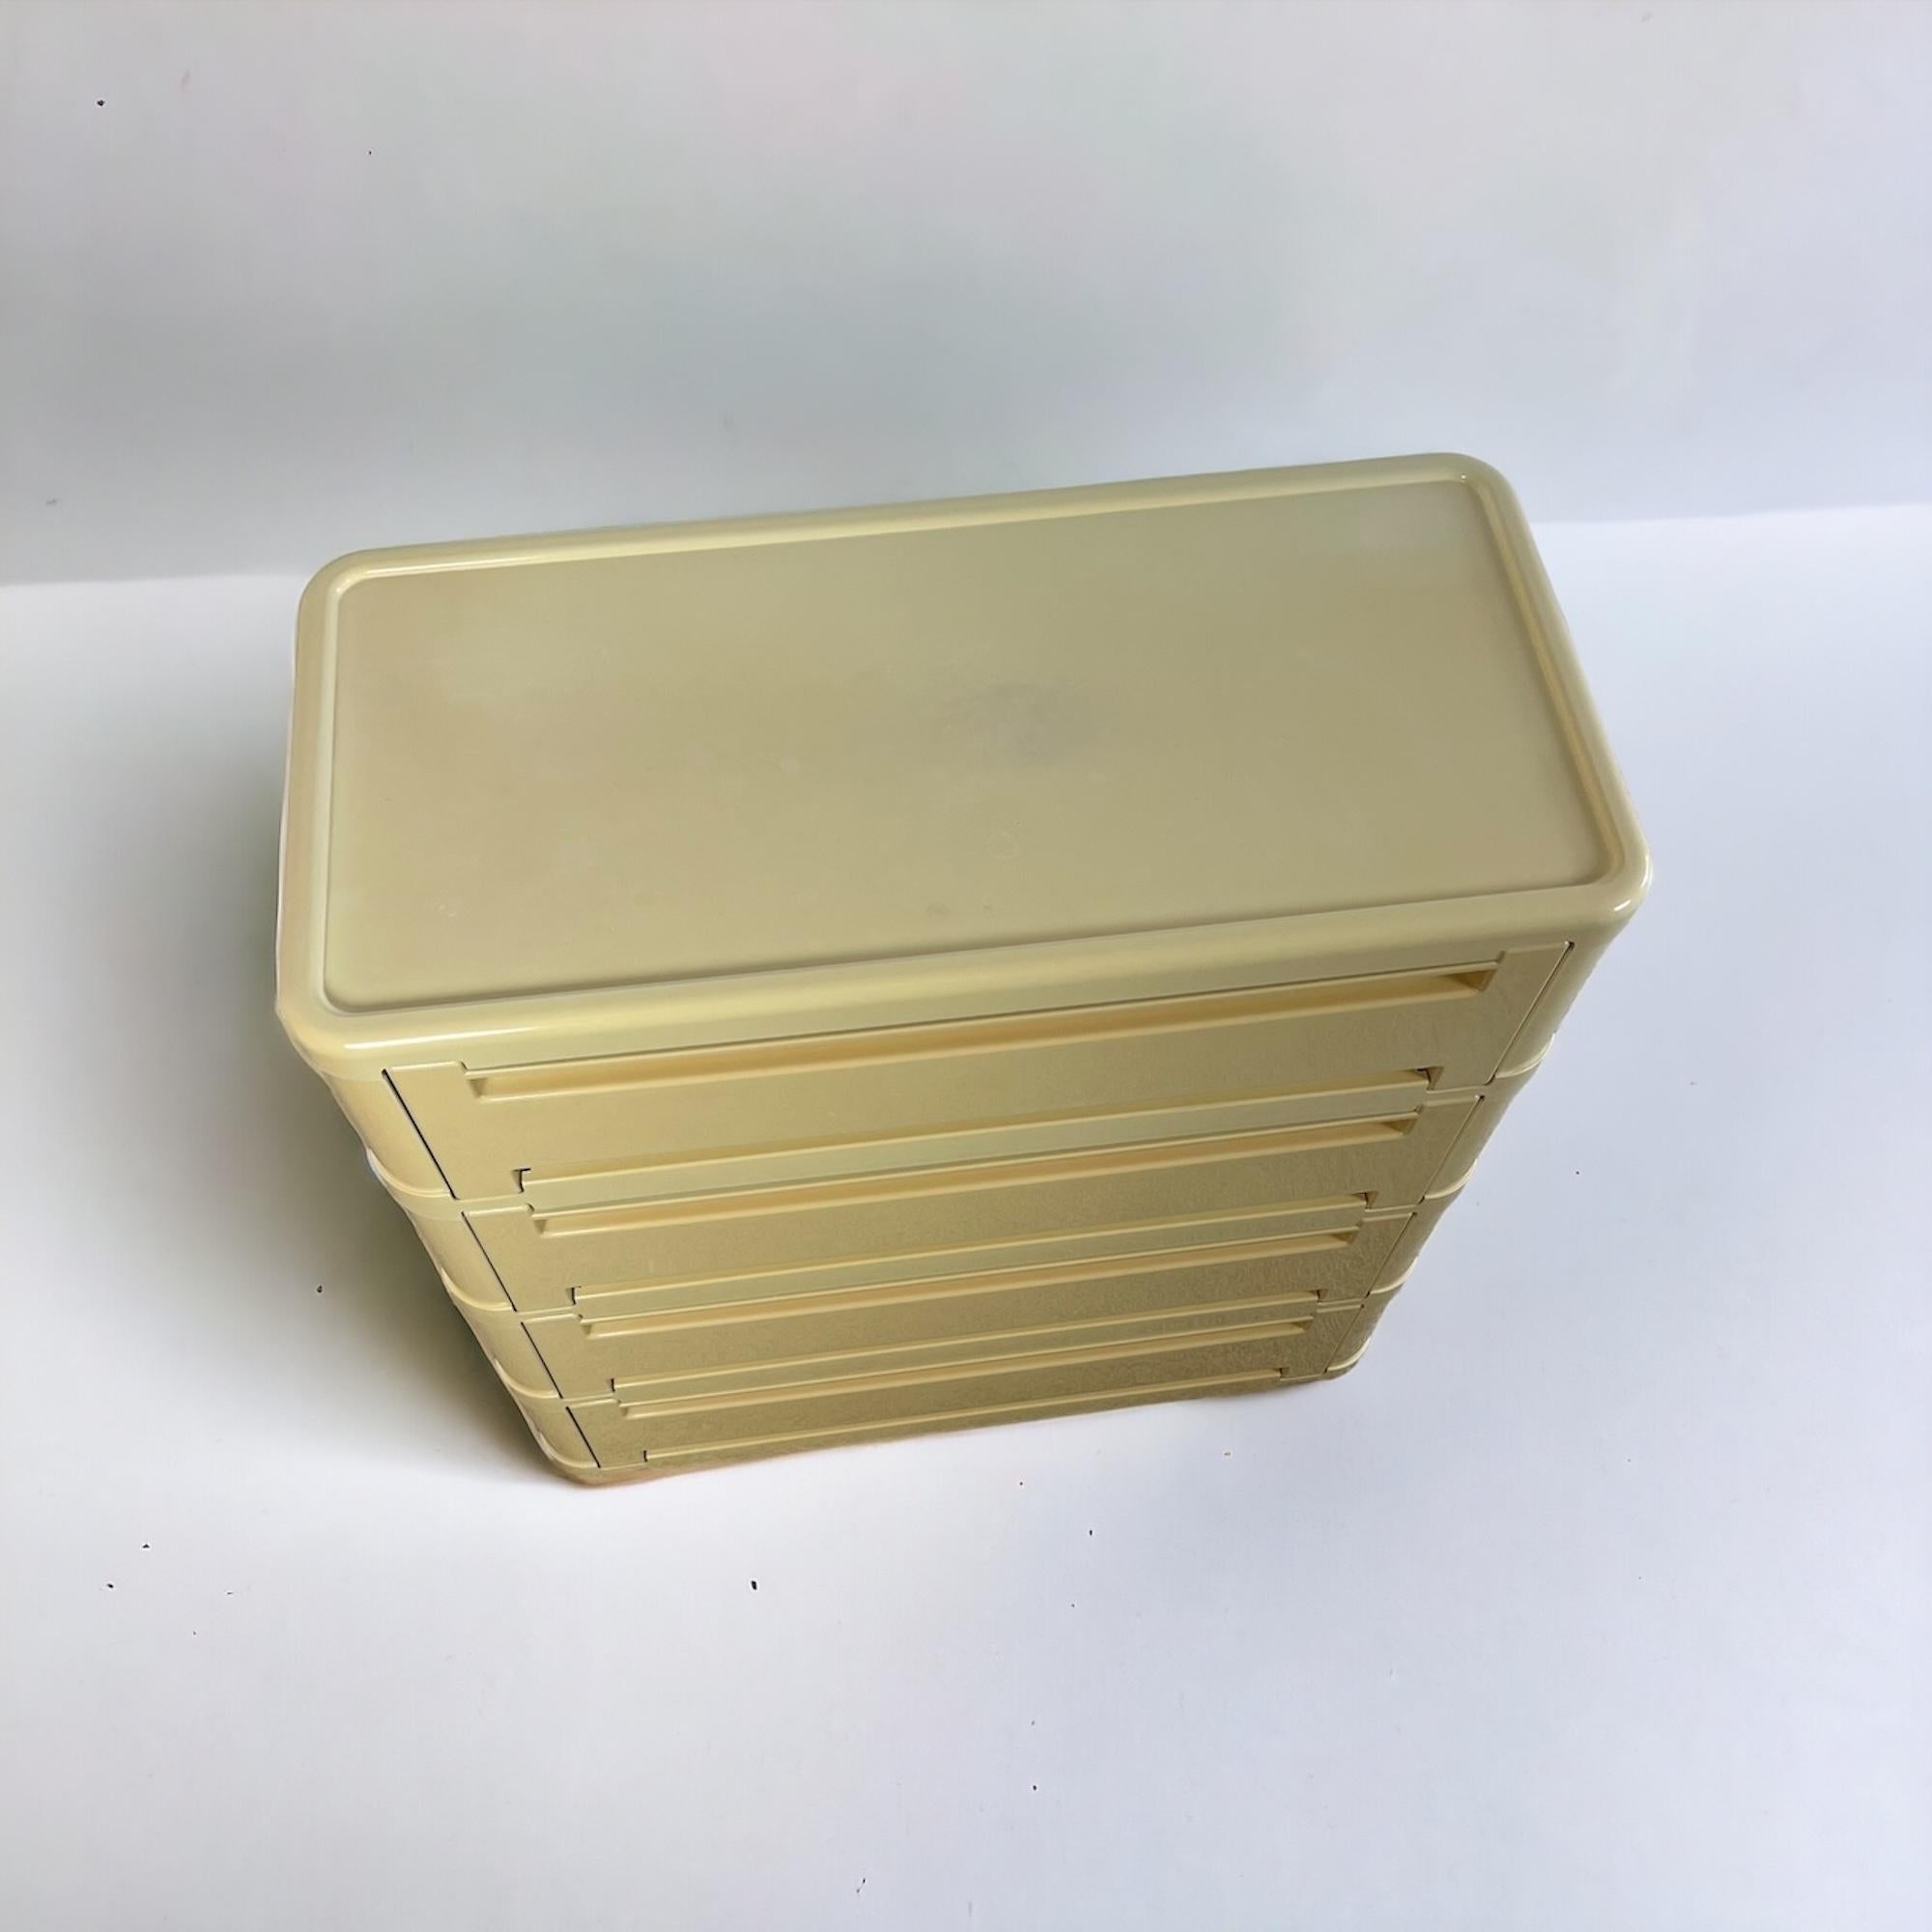 Plastic Olaf Von Bohr Chest of Drawers Model 4964 by Kartell - Space Age design, 70s